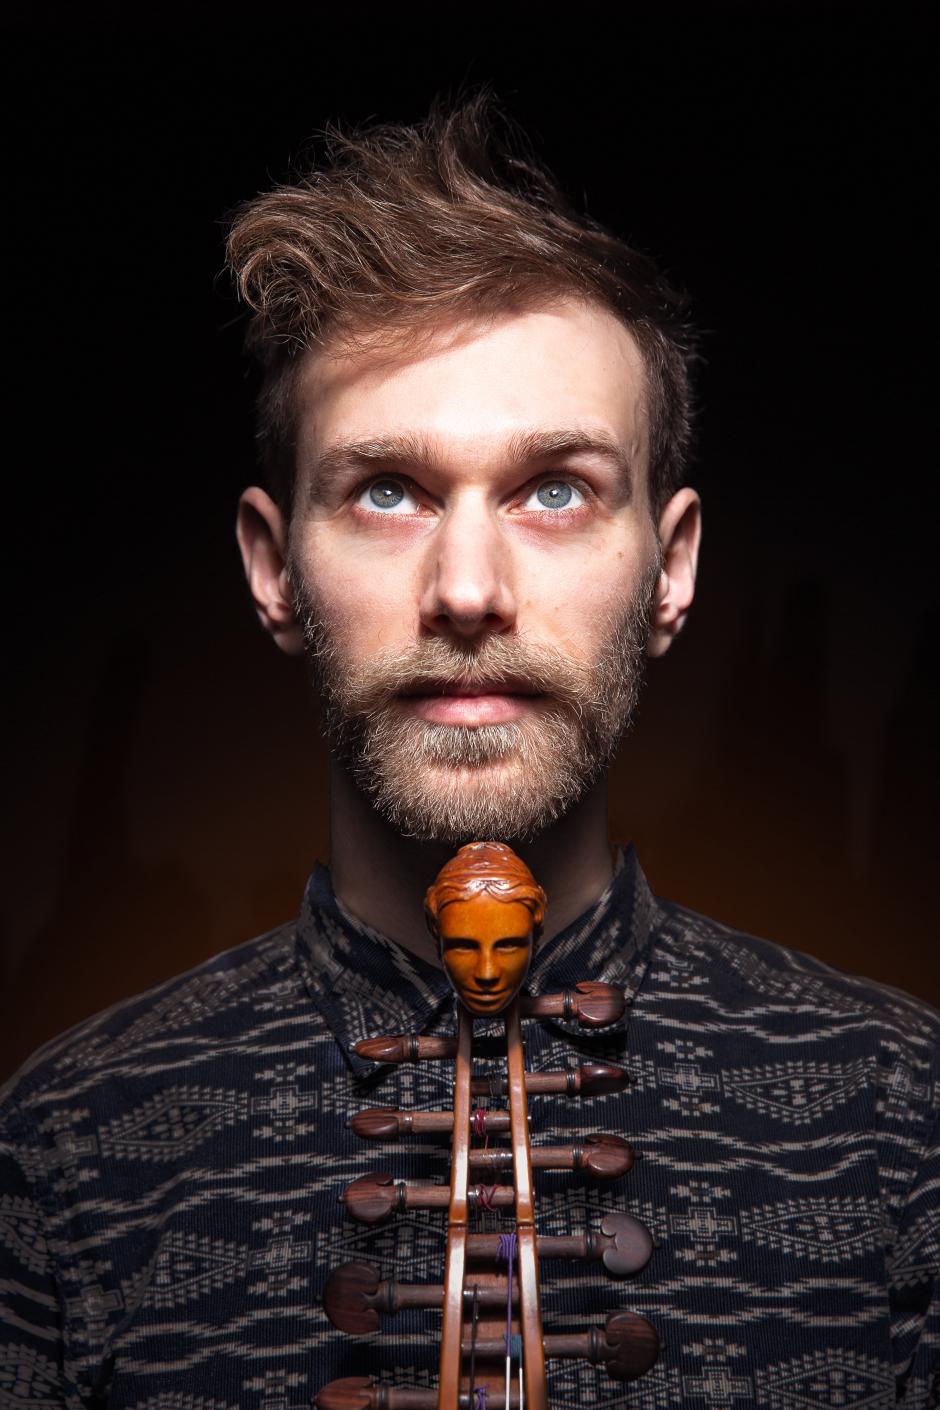 Musician Jaron Freeman-Fox looks up while holding an instrument under the chin